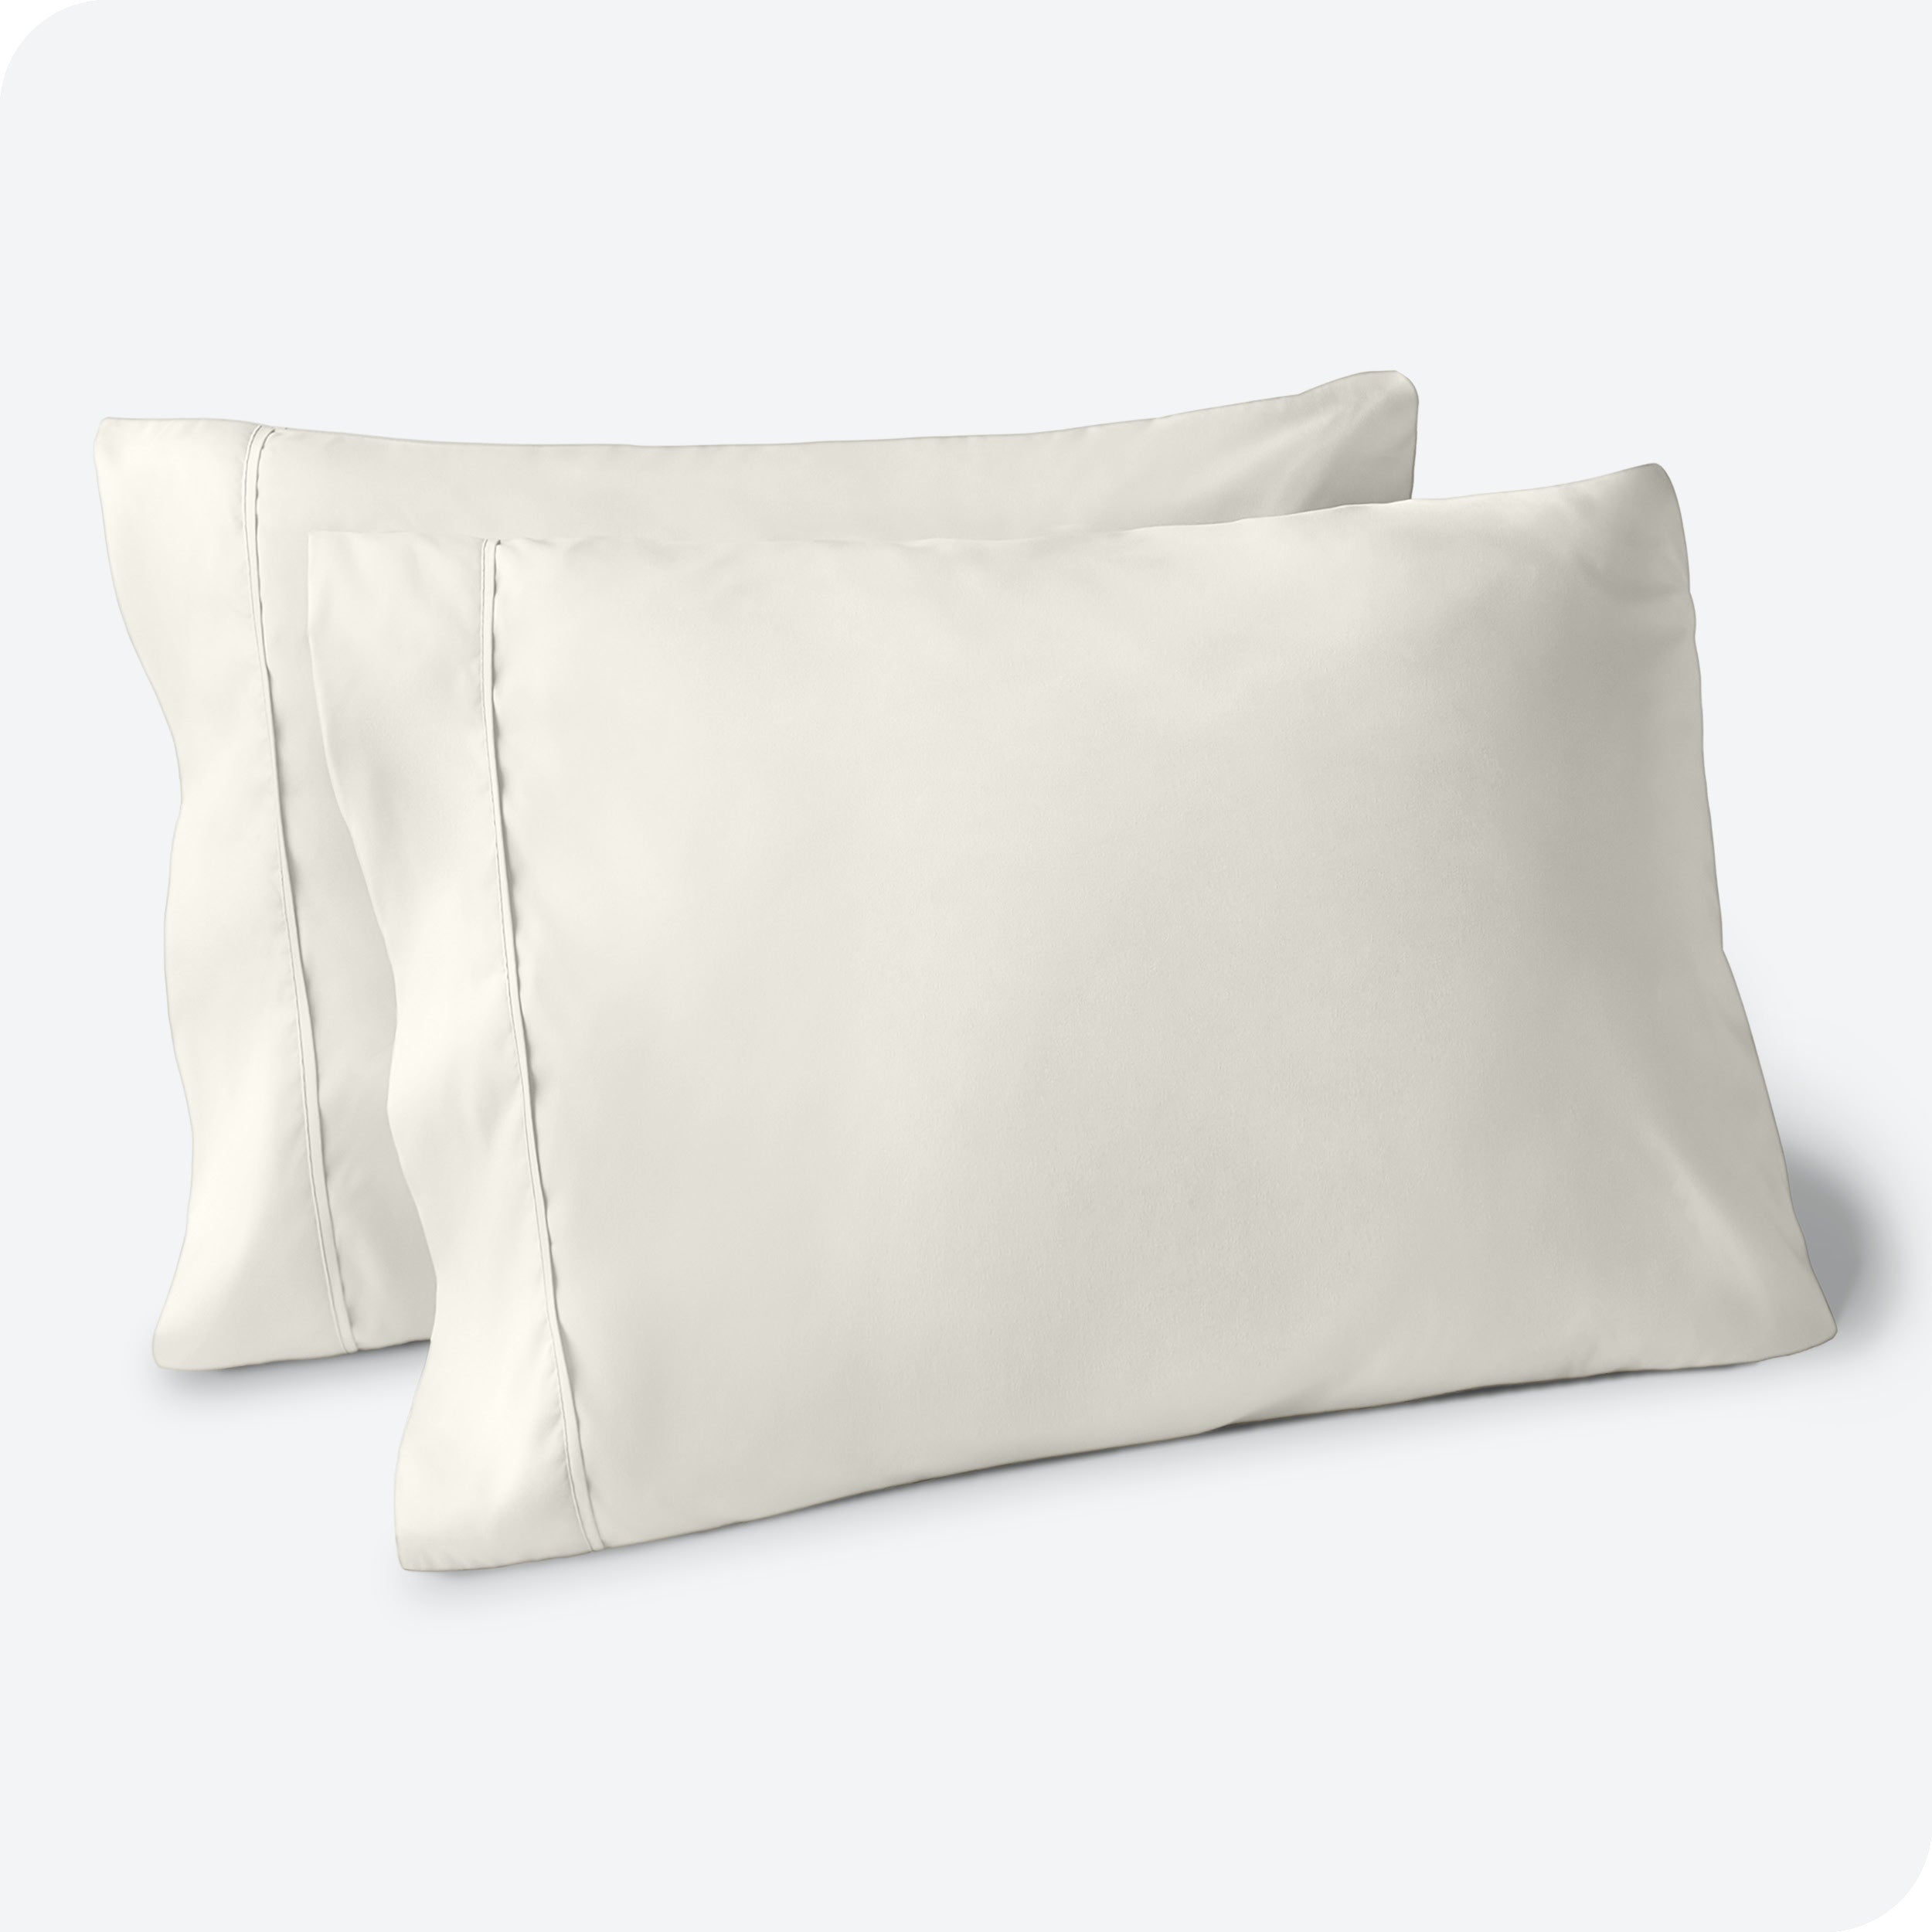 Two pillows on a white background with cream pillowcases on them